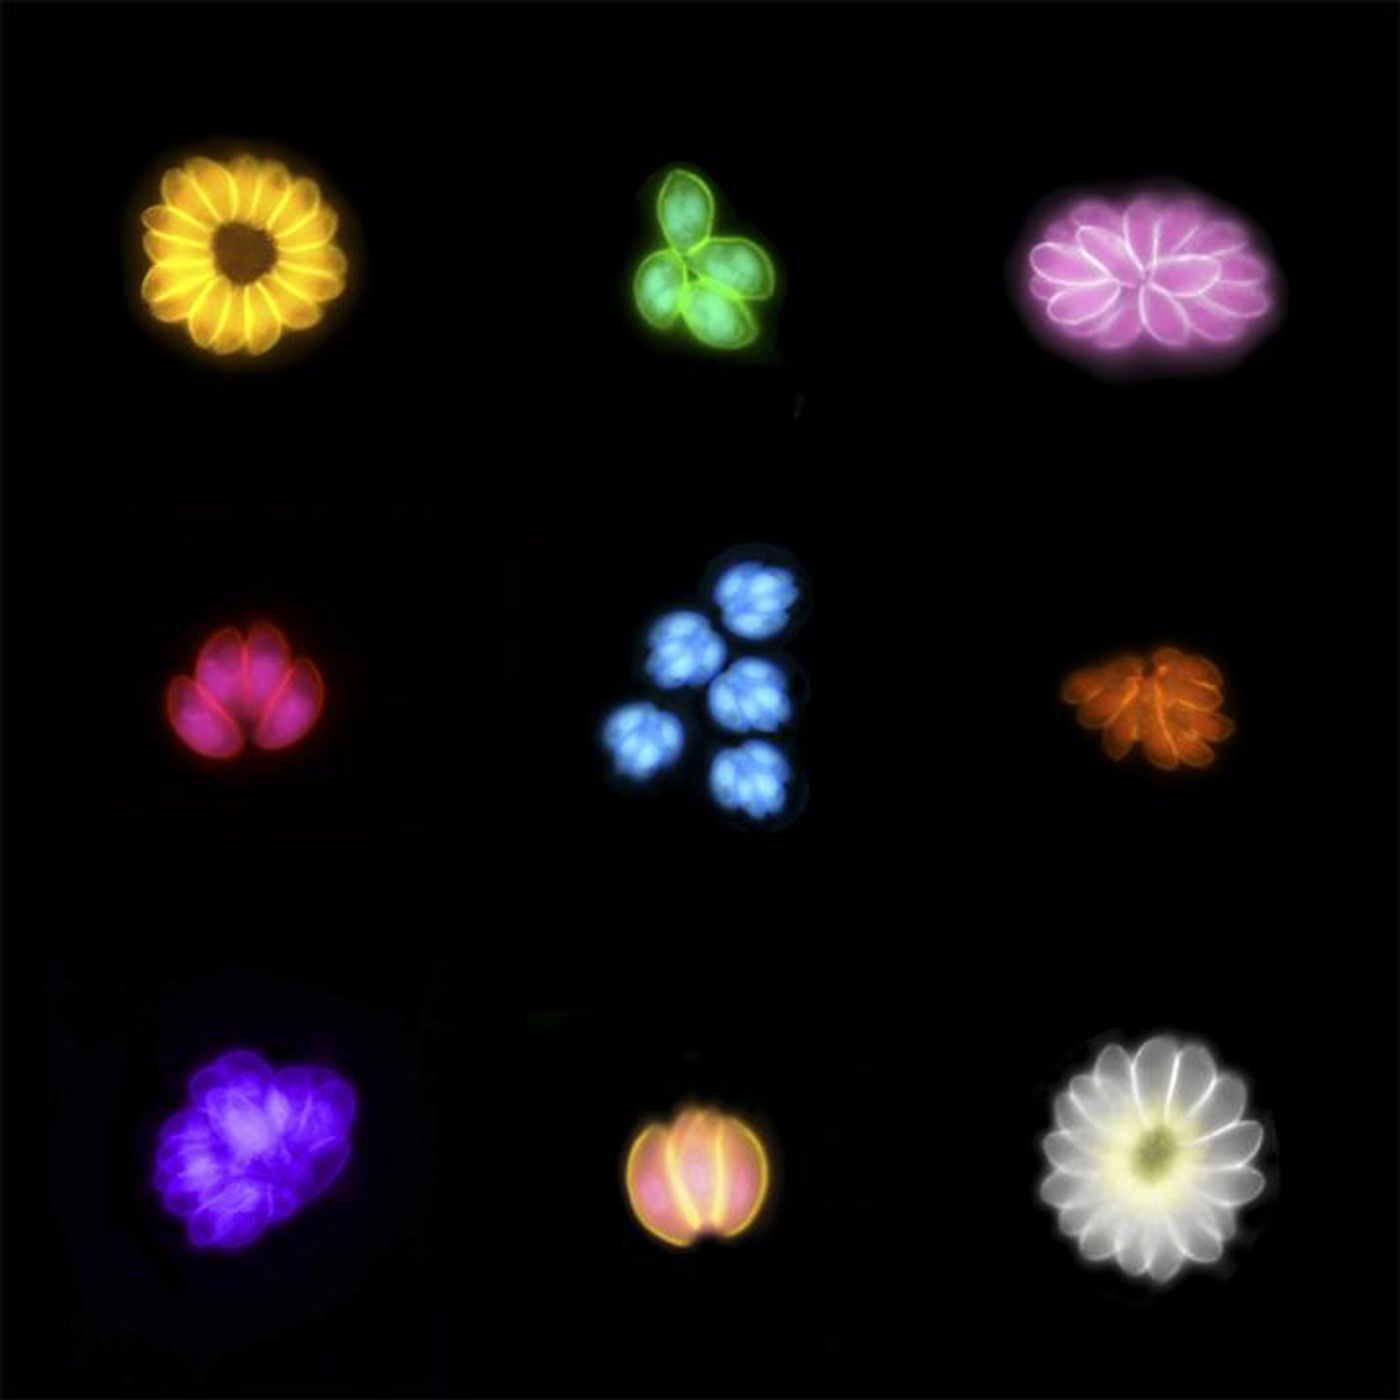 Toxoplasma parasites within cells can form these visually appealing 'bouquets' (which have been artificially coloured), but they can cause severe illness and long-lasting health impacts. Our latest research suggests Toxoplasma infection may also impact the brain health of subsequent generations. / Credit: Walter and Eliza Hall Institute, Australia